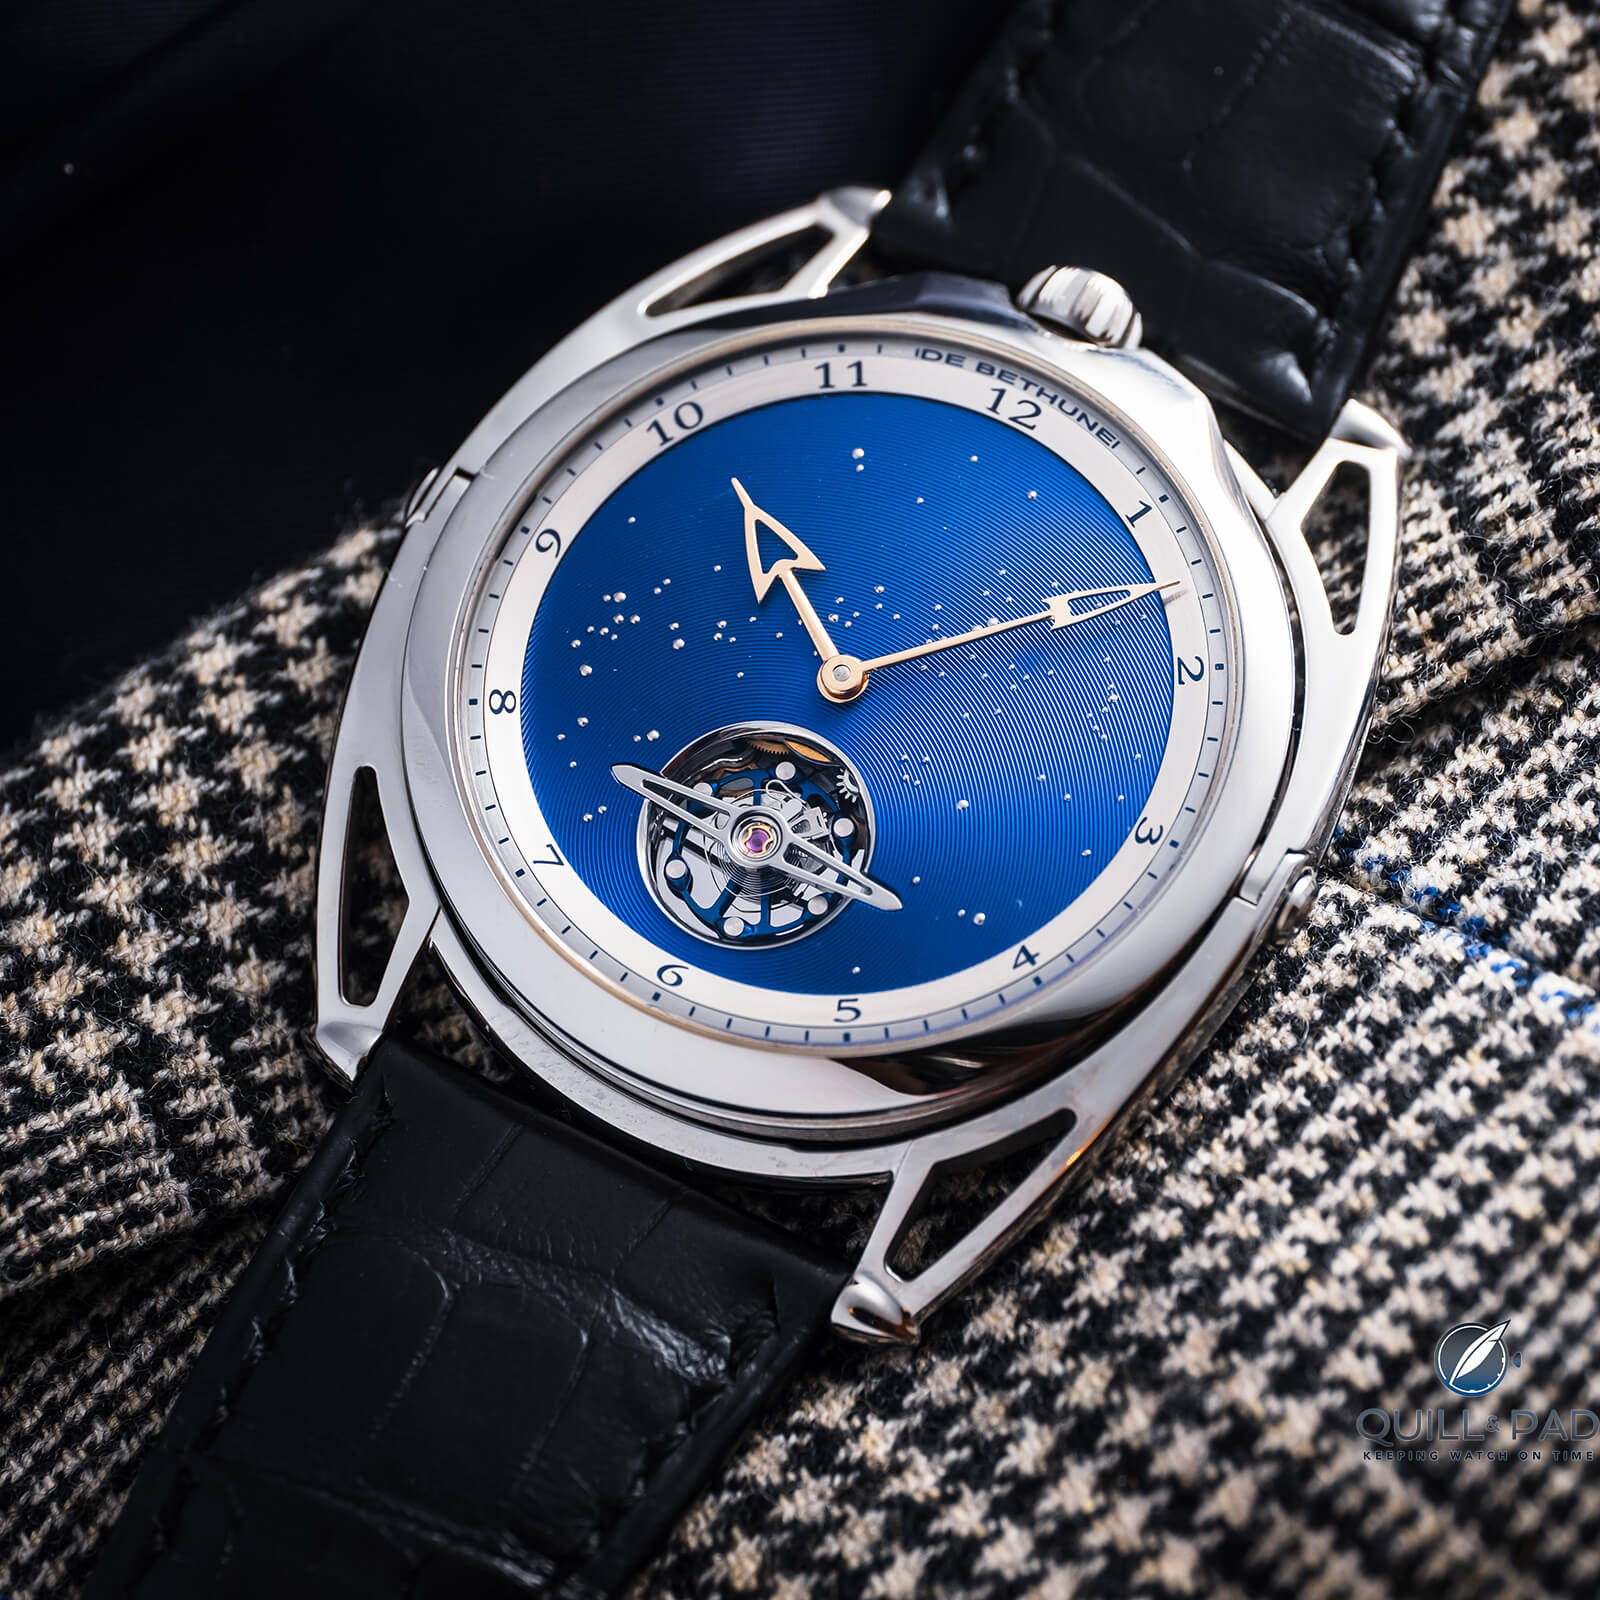 Top 5 Watches Of So Far A Totally Biased Round Table Discussion Of Our Favorite Timepieces Of The Year To Date Quill Pad